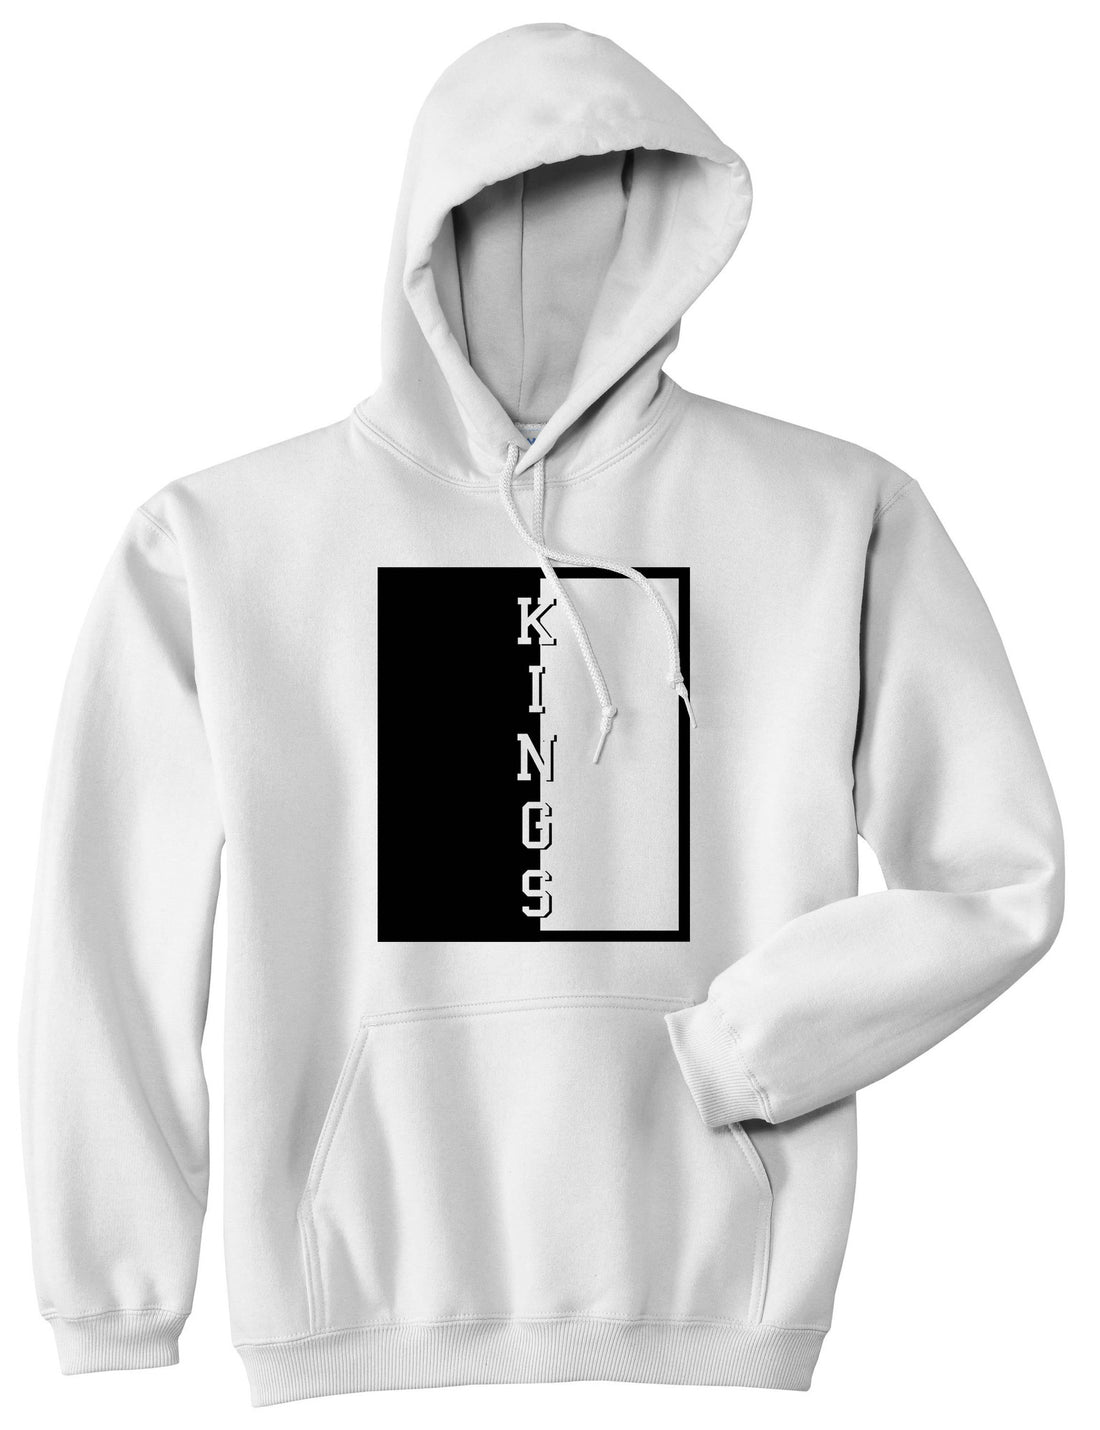 Scarface New York Tony Montana Pullover Hoodie Hoody in White by Kings Of NY